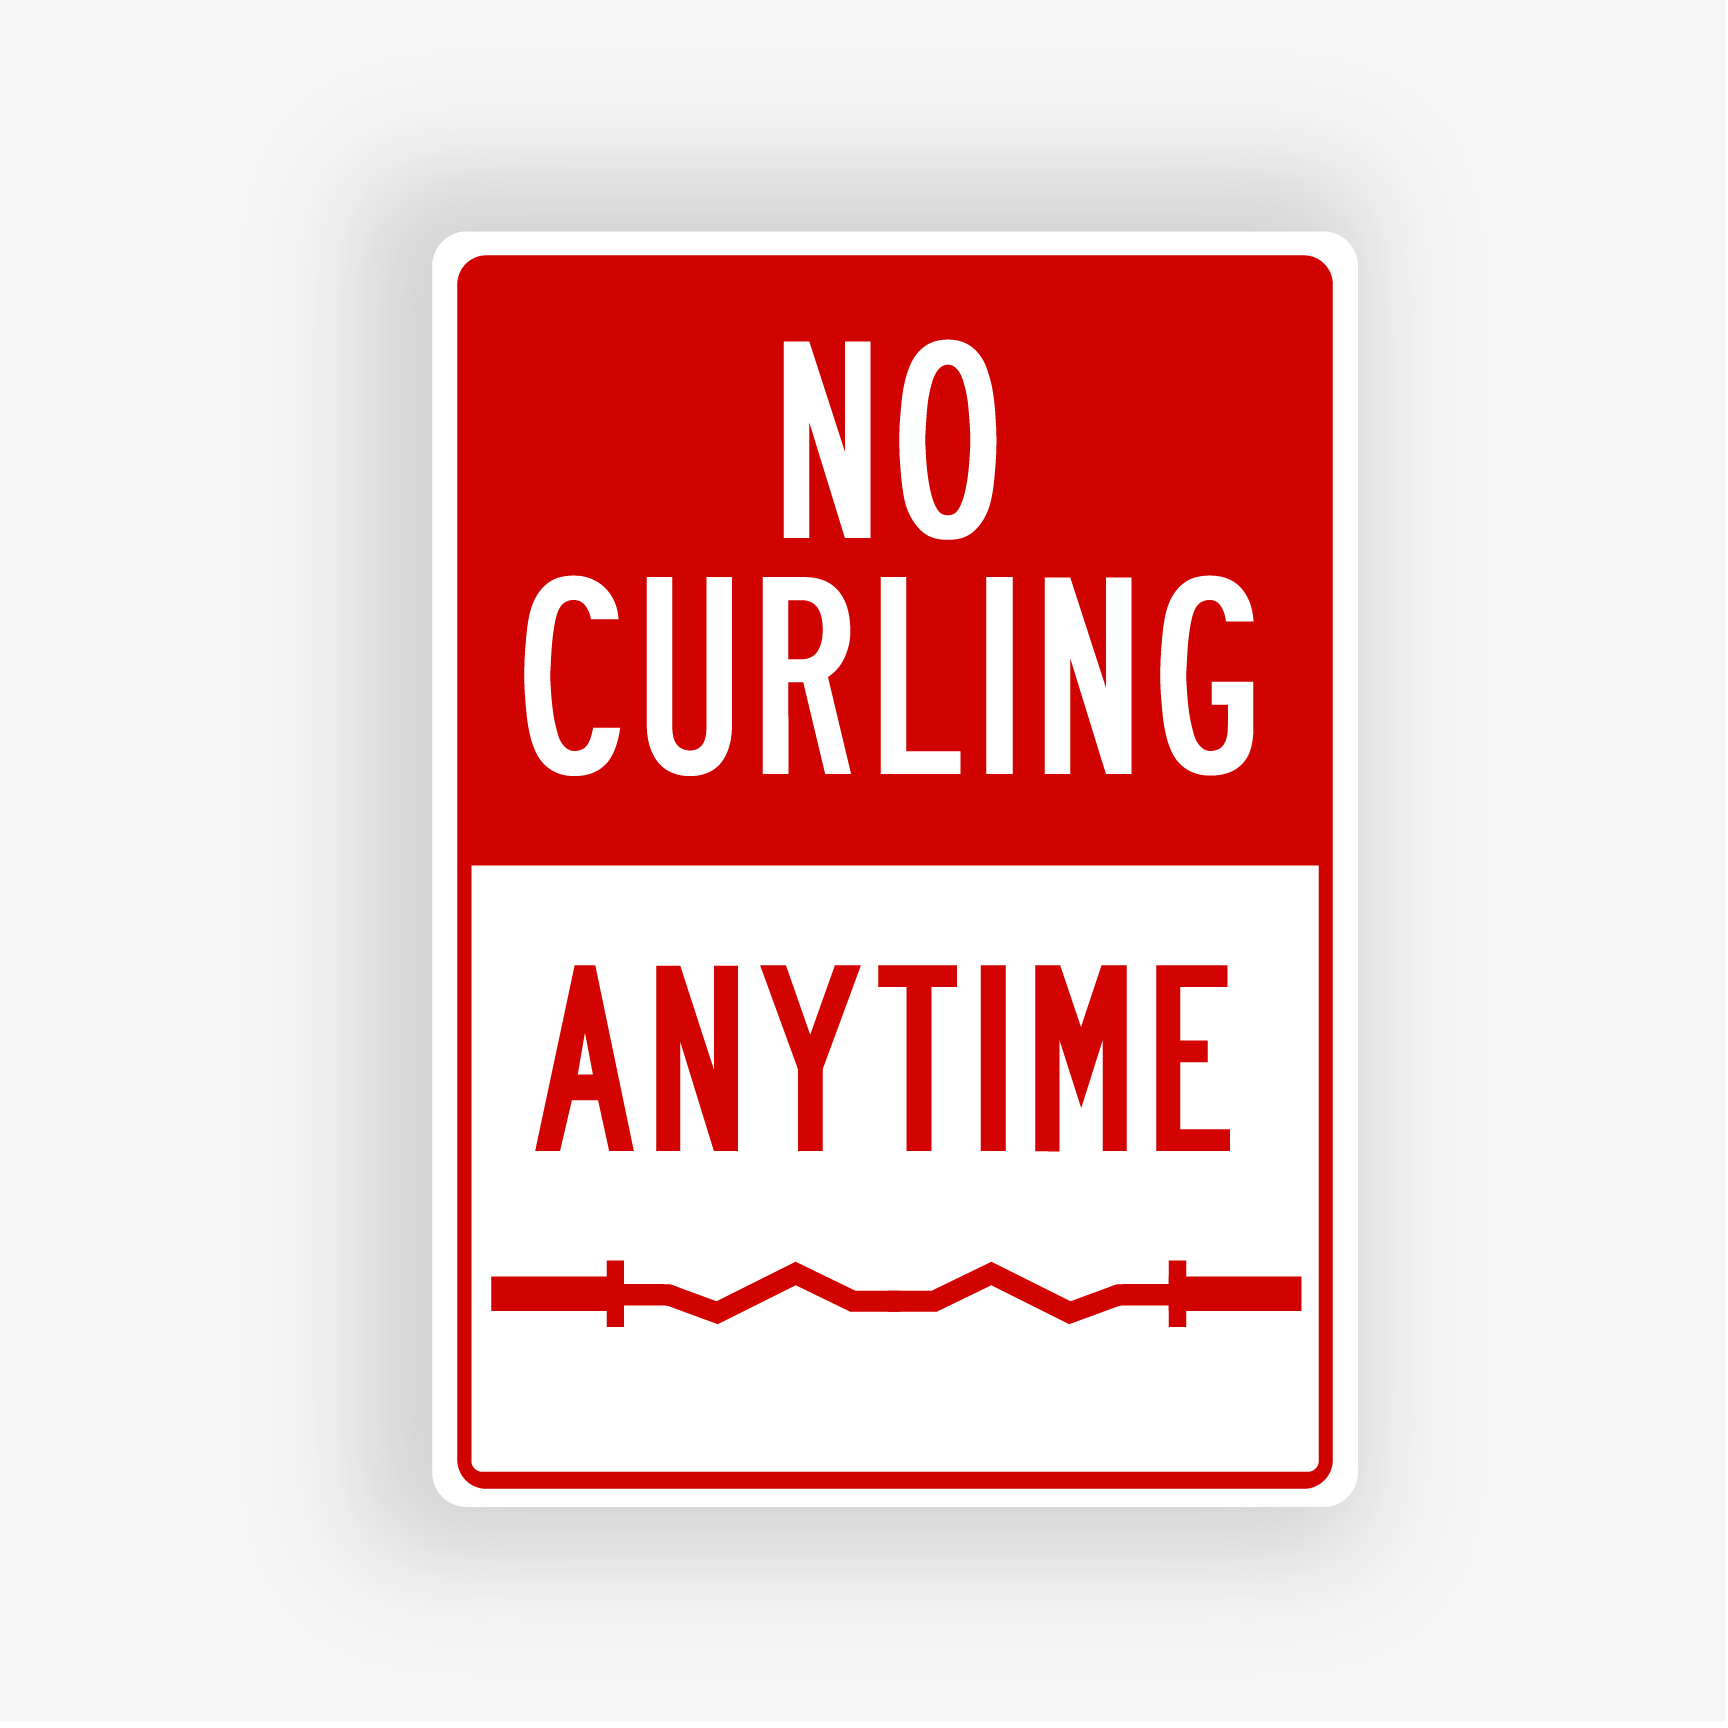 No Curling Anytime Street Sign